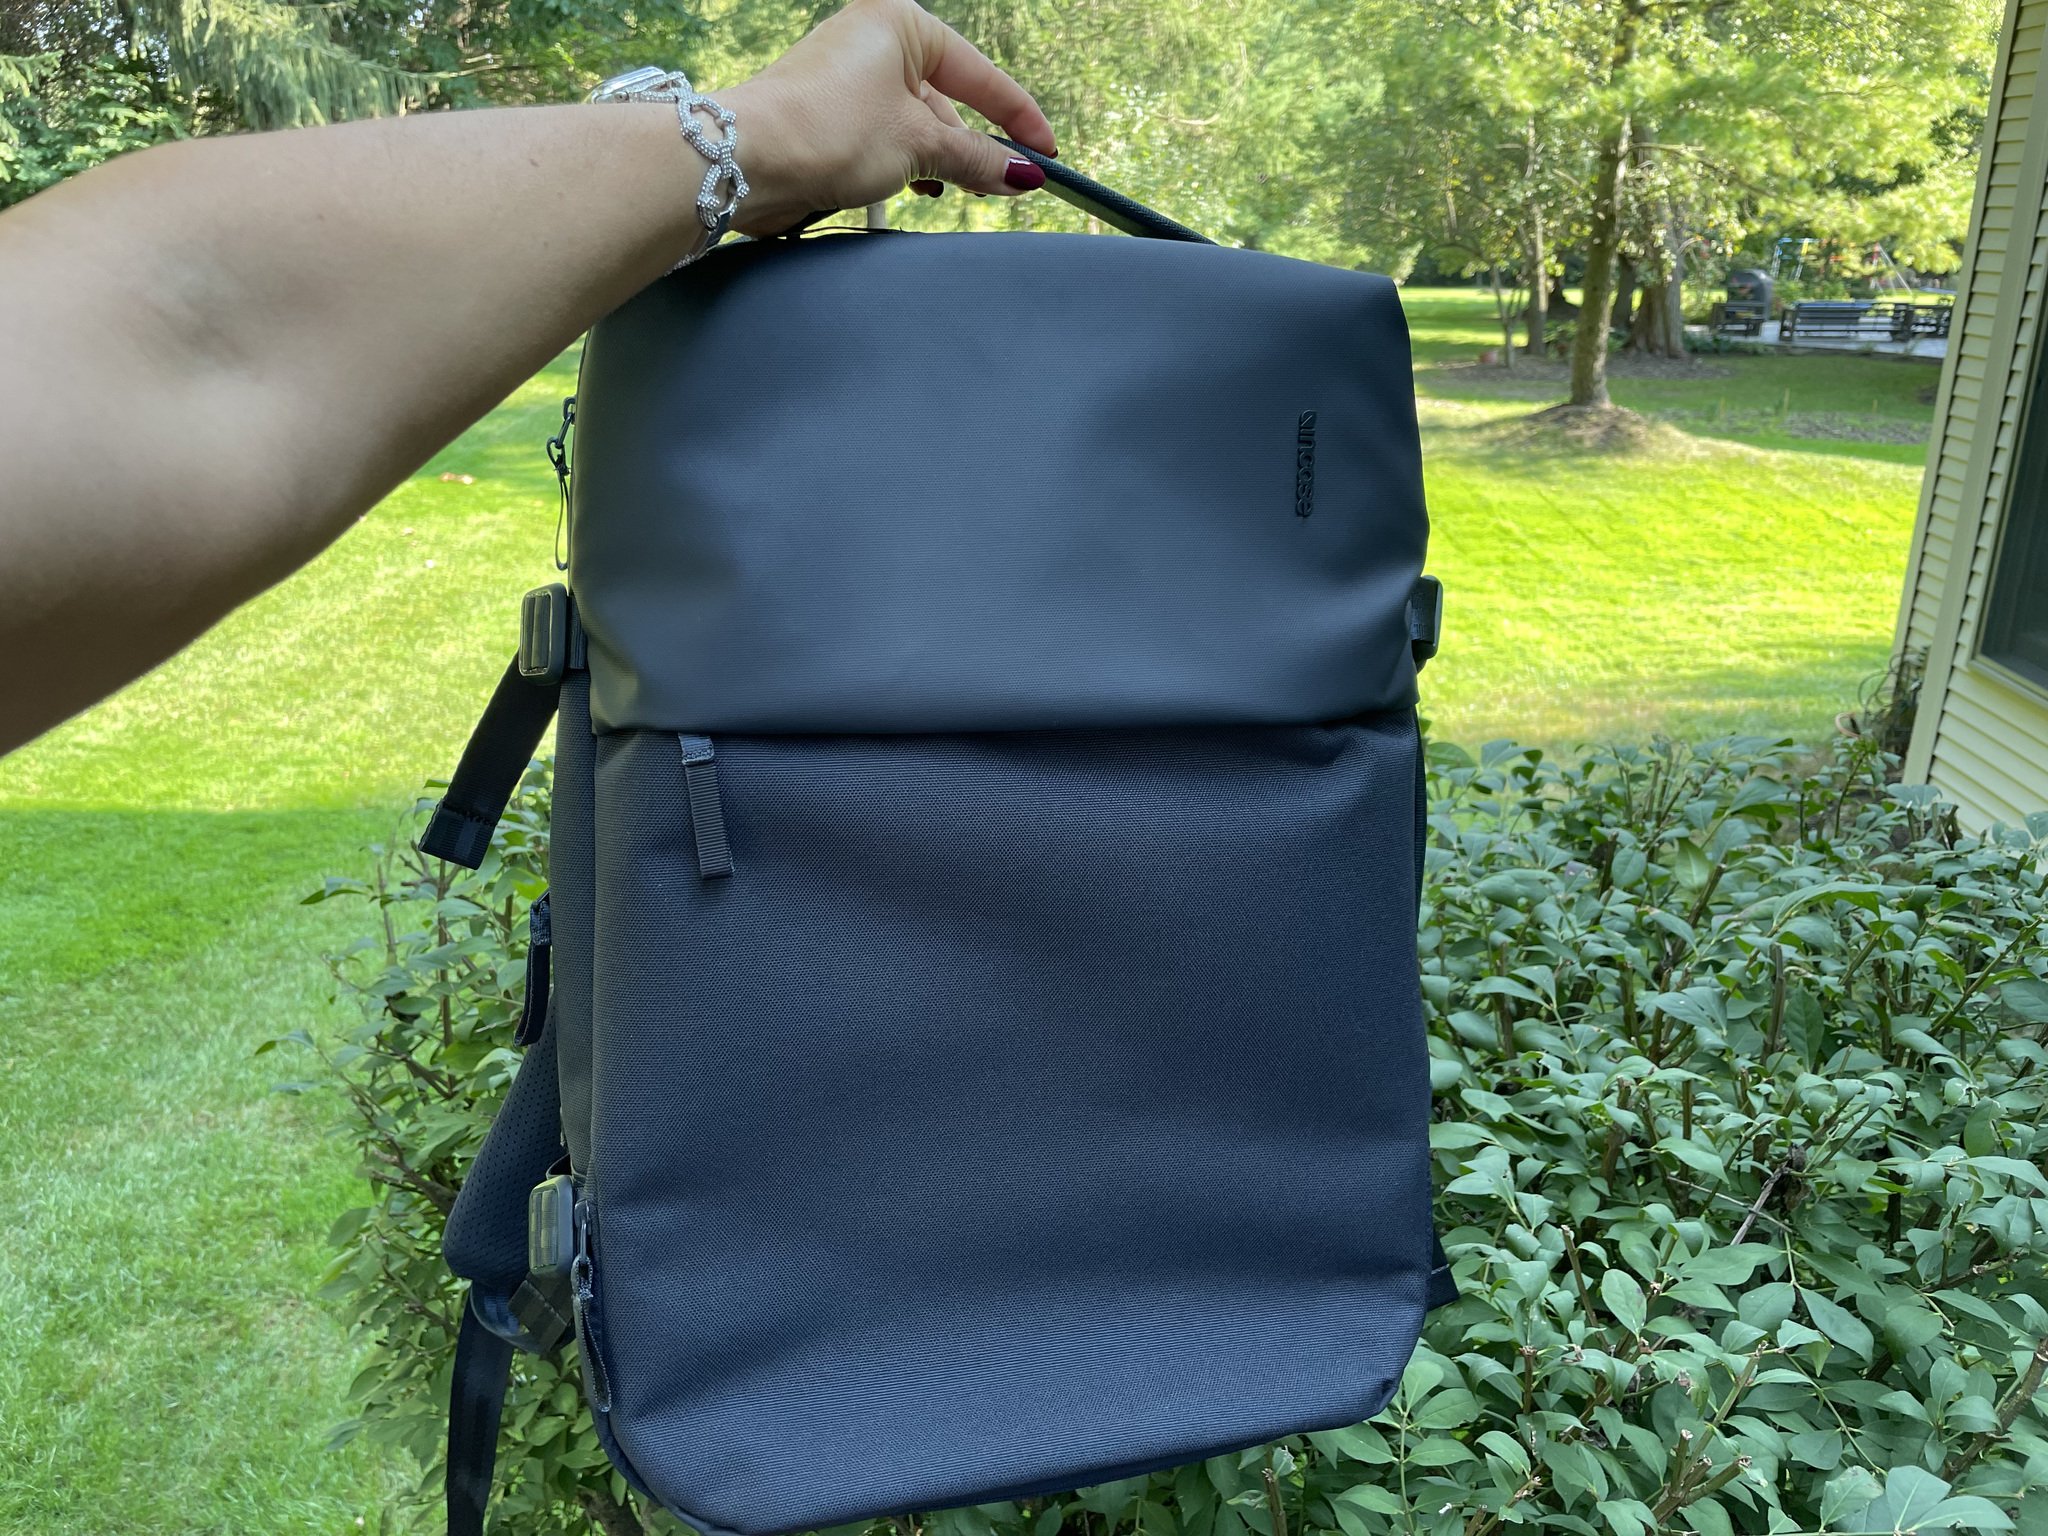 Incase Travel Pack review: Sustainable tech and lifestyle crossover laptop bag